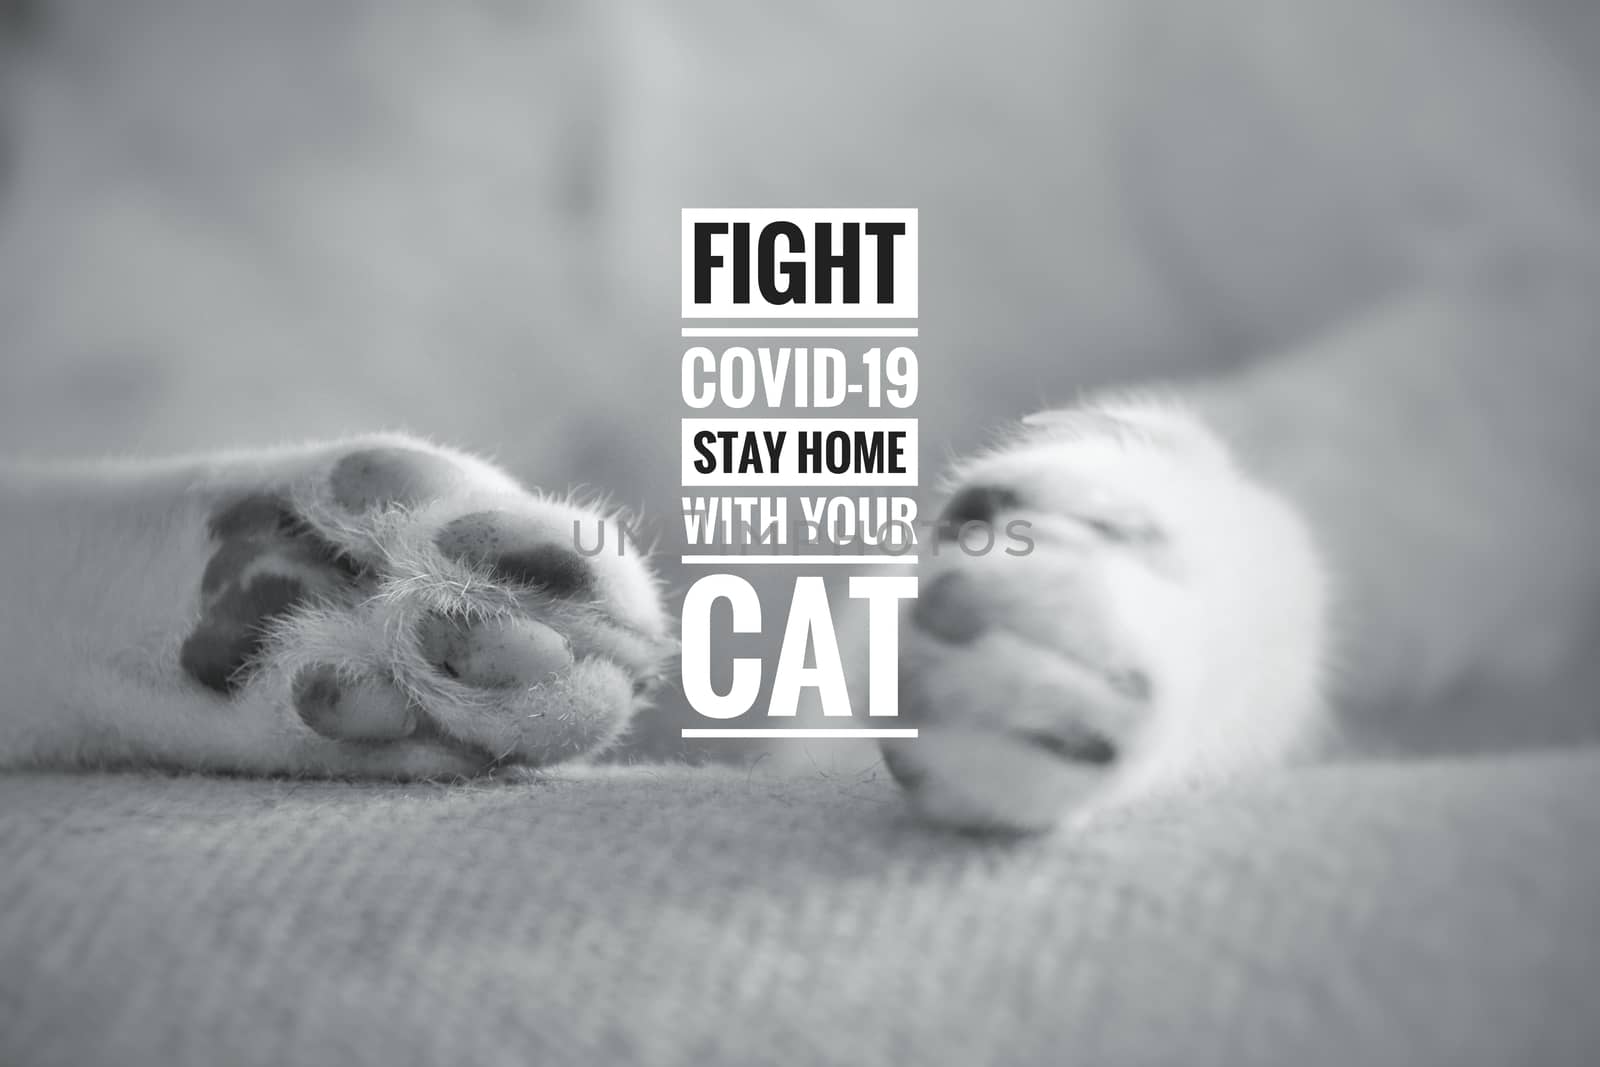 Conceptual photo of the delicate paws of a sleeping kitty with the message to stay home with your cat to fight the spread of covid-19 pandemic